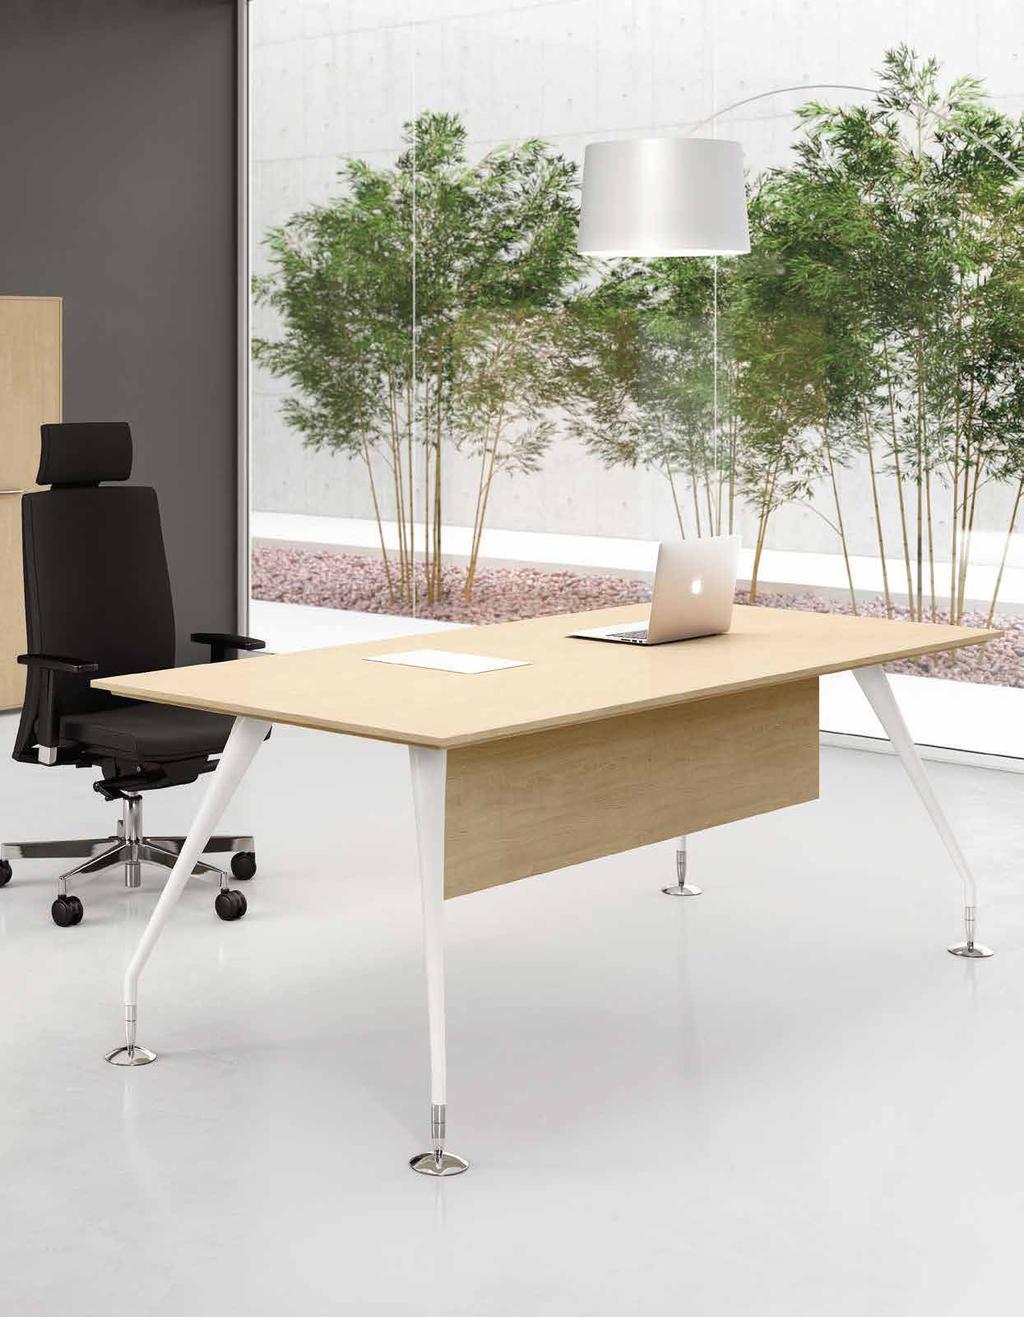 ENOSI line of office furniture is enriched by clear cut cabinets and storage units available in a sophisticated